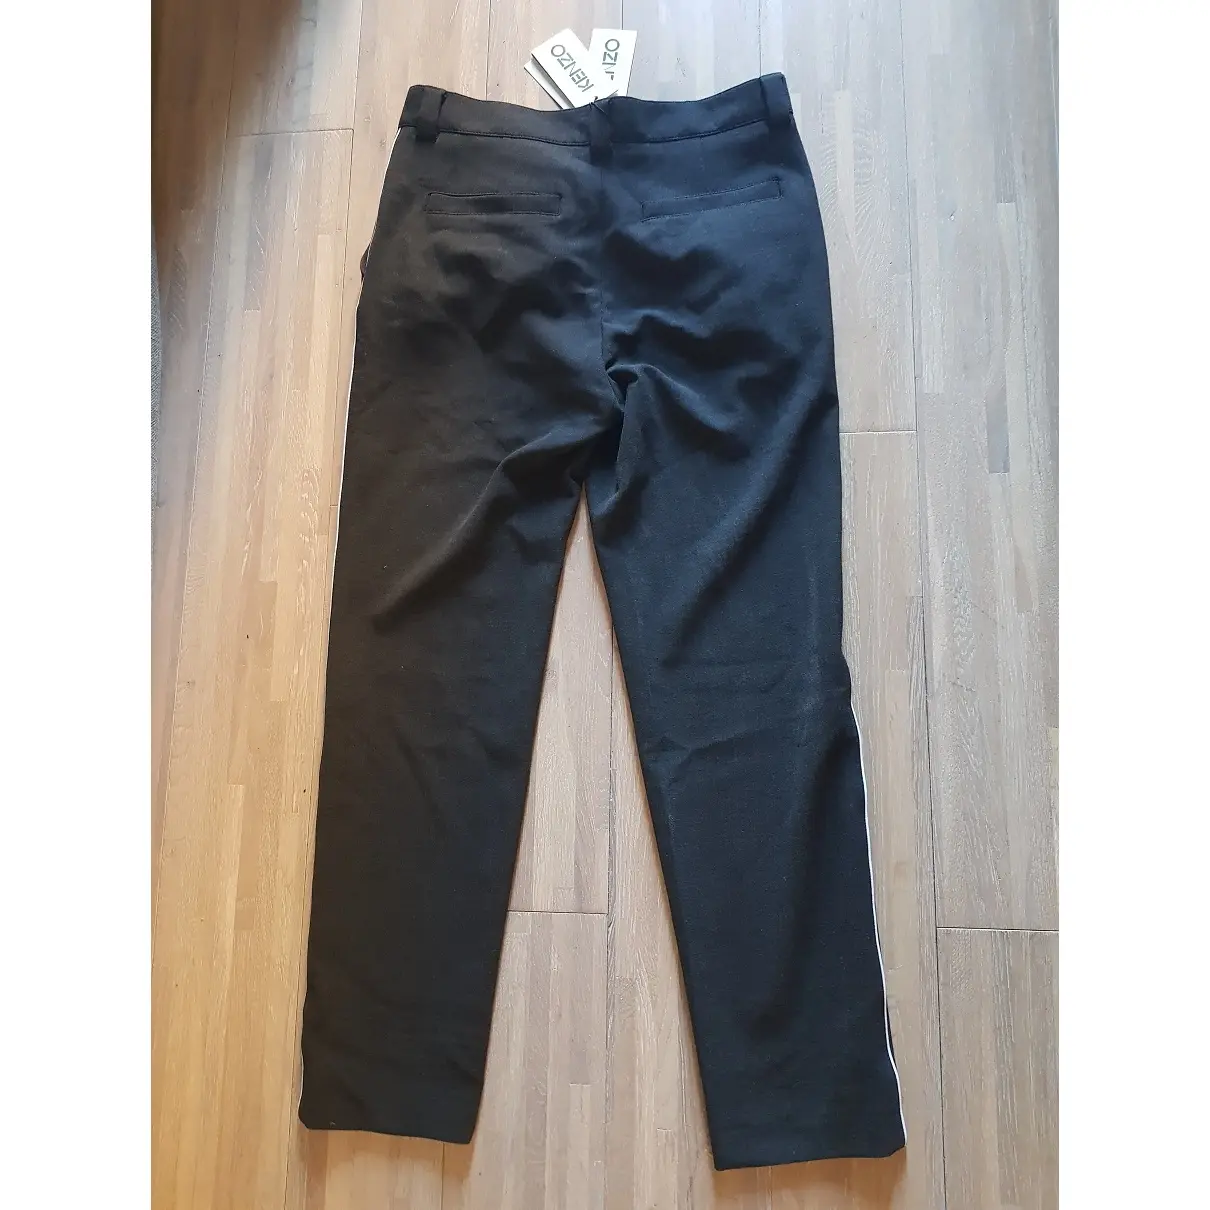 Kenzo Trousers for sale